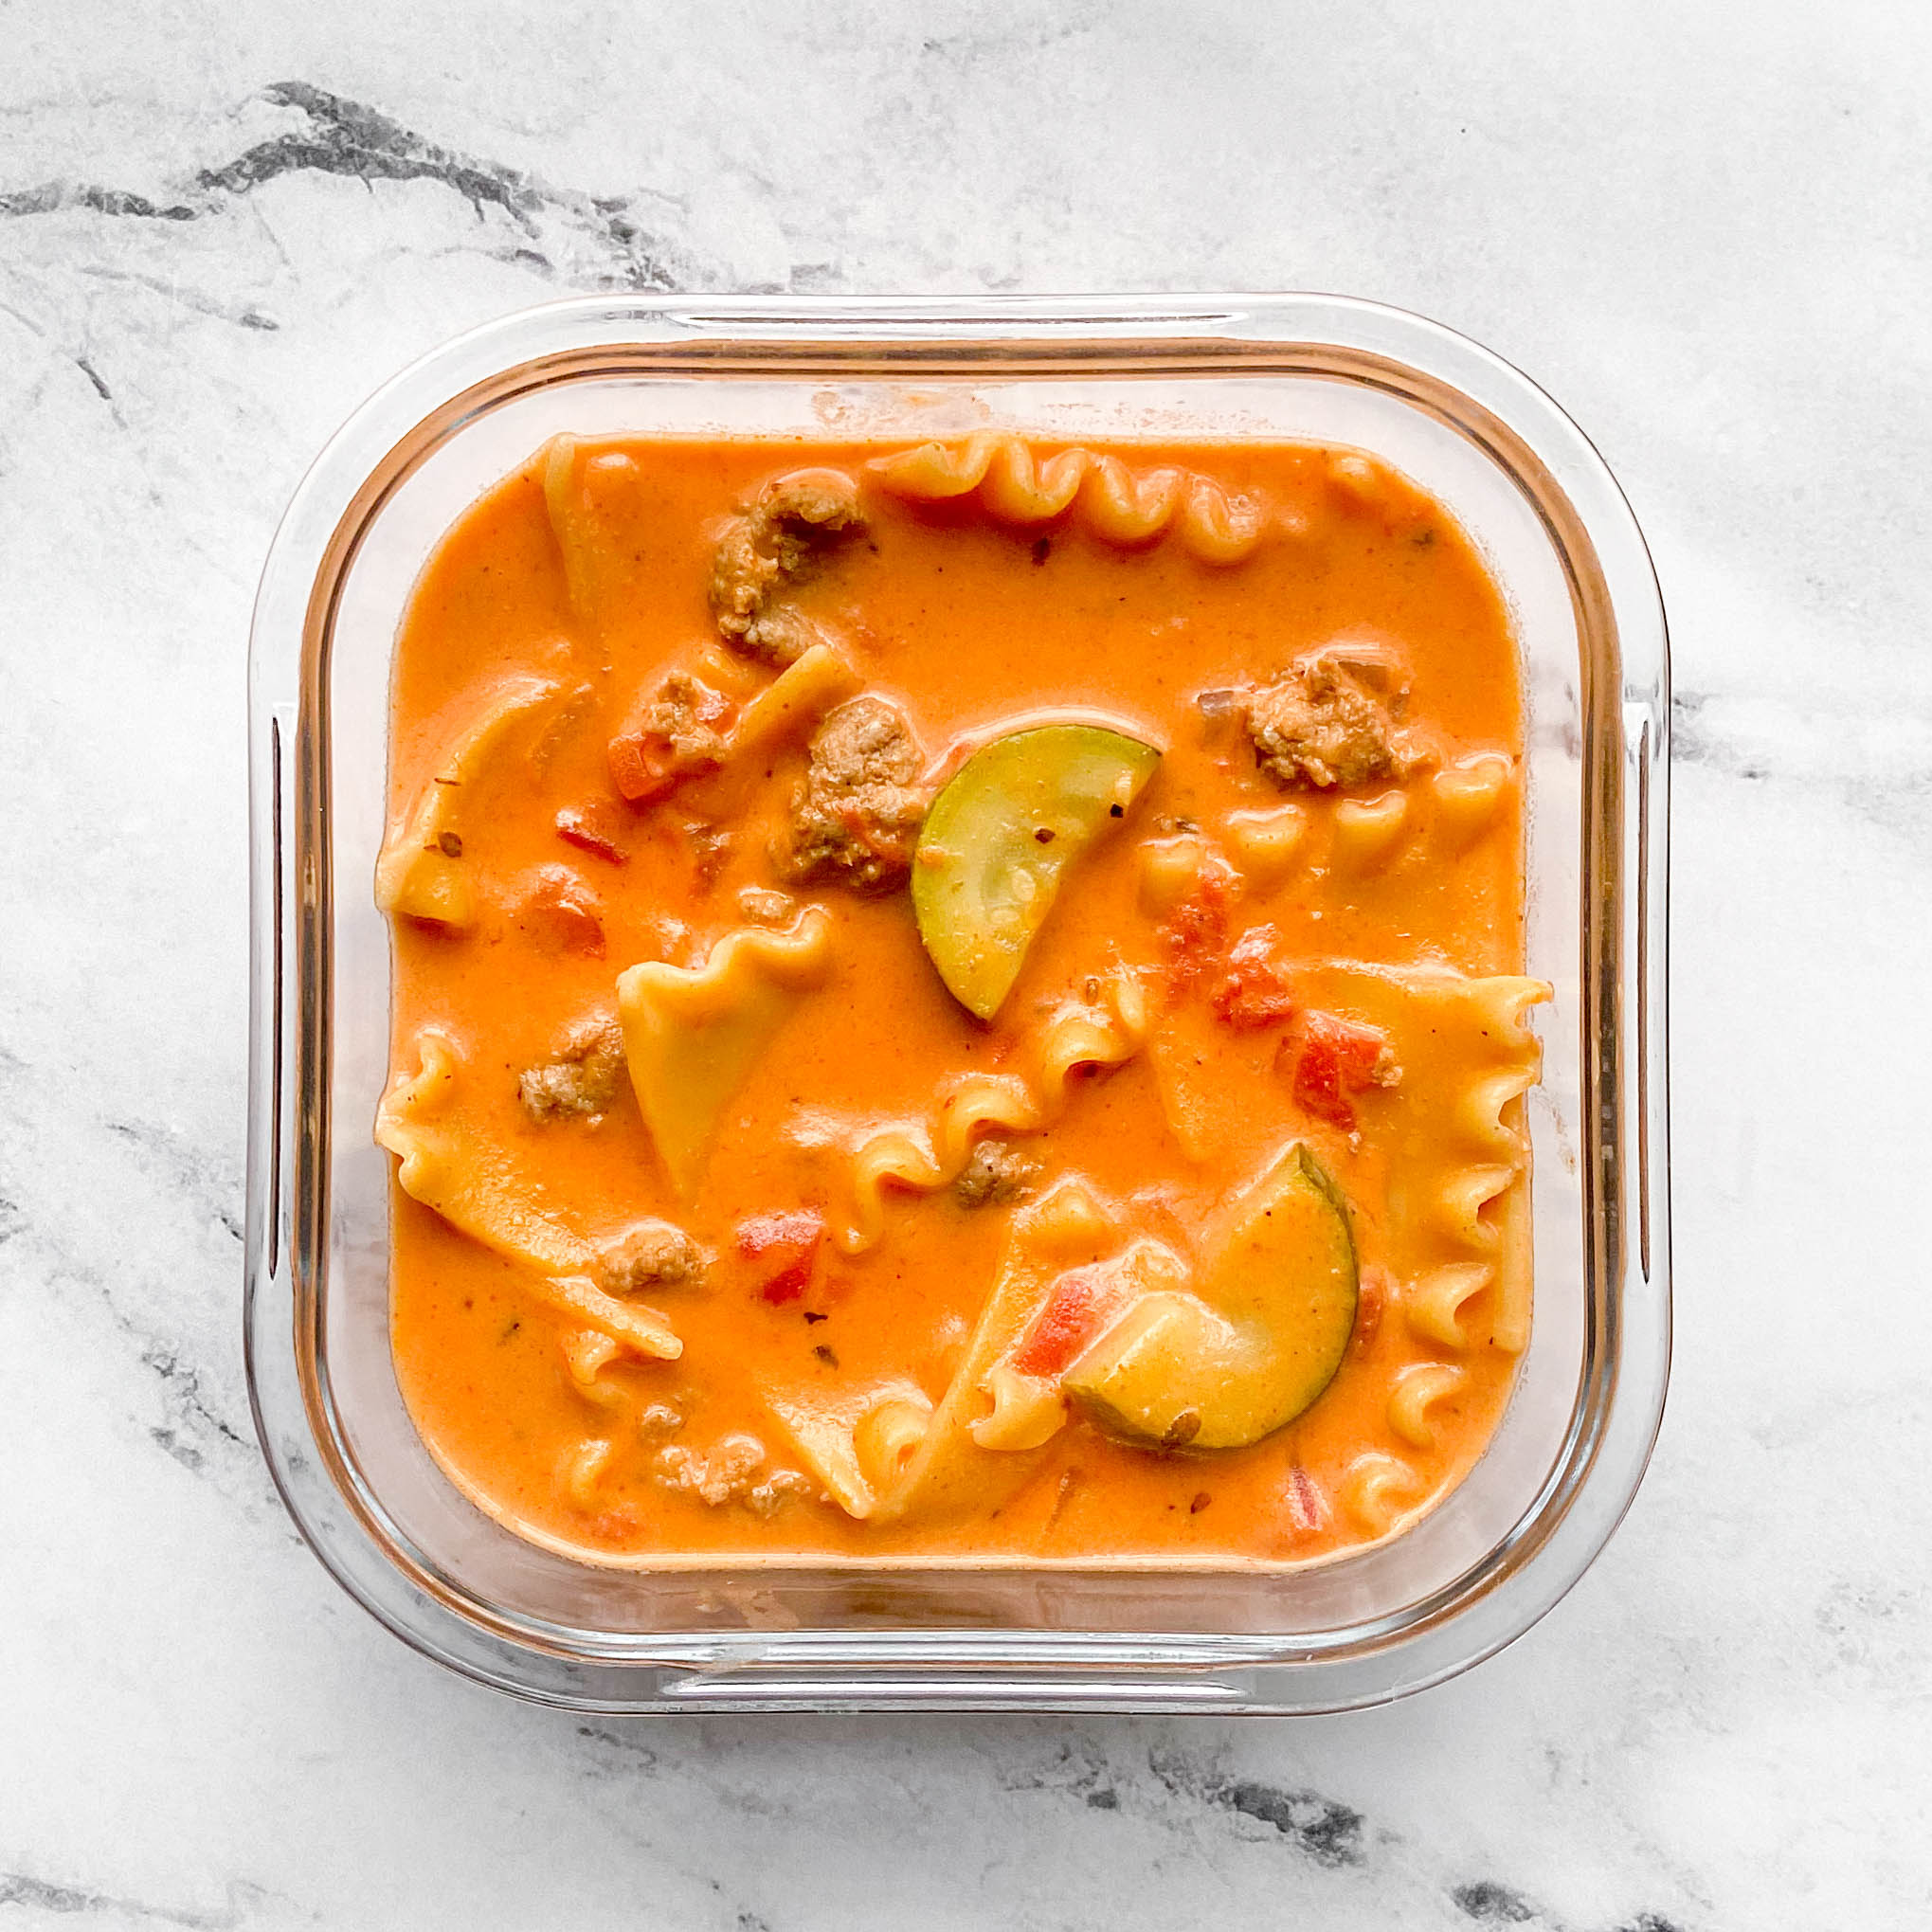 a square container of lasagna soup on a white and grey background. The soup has noodles, zucchini, meat, and an orange broth